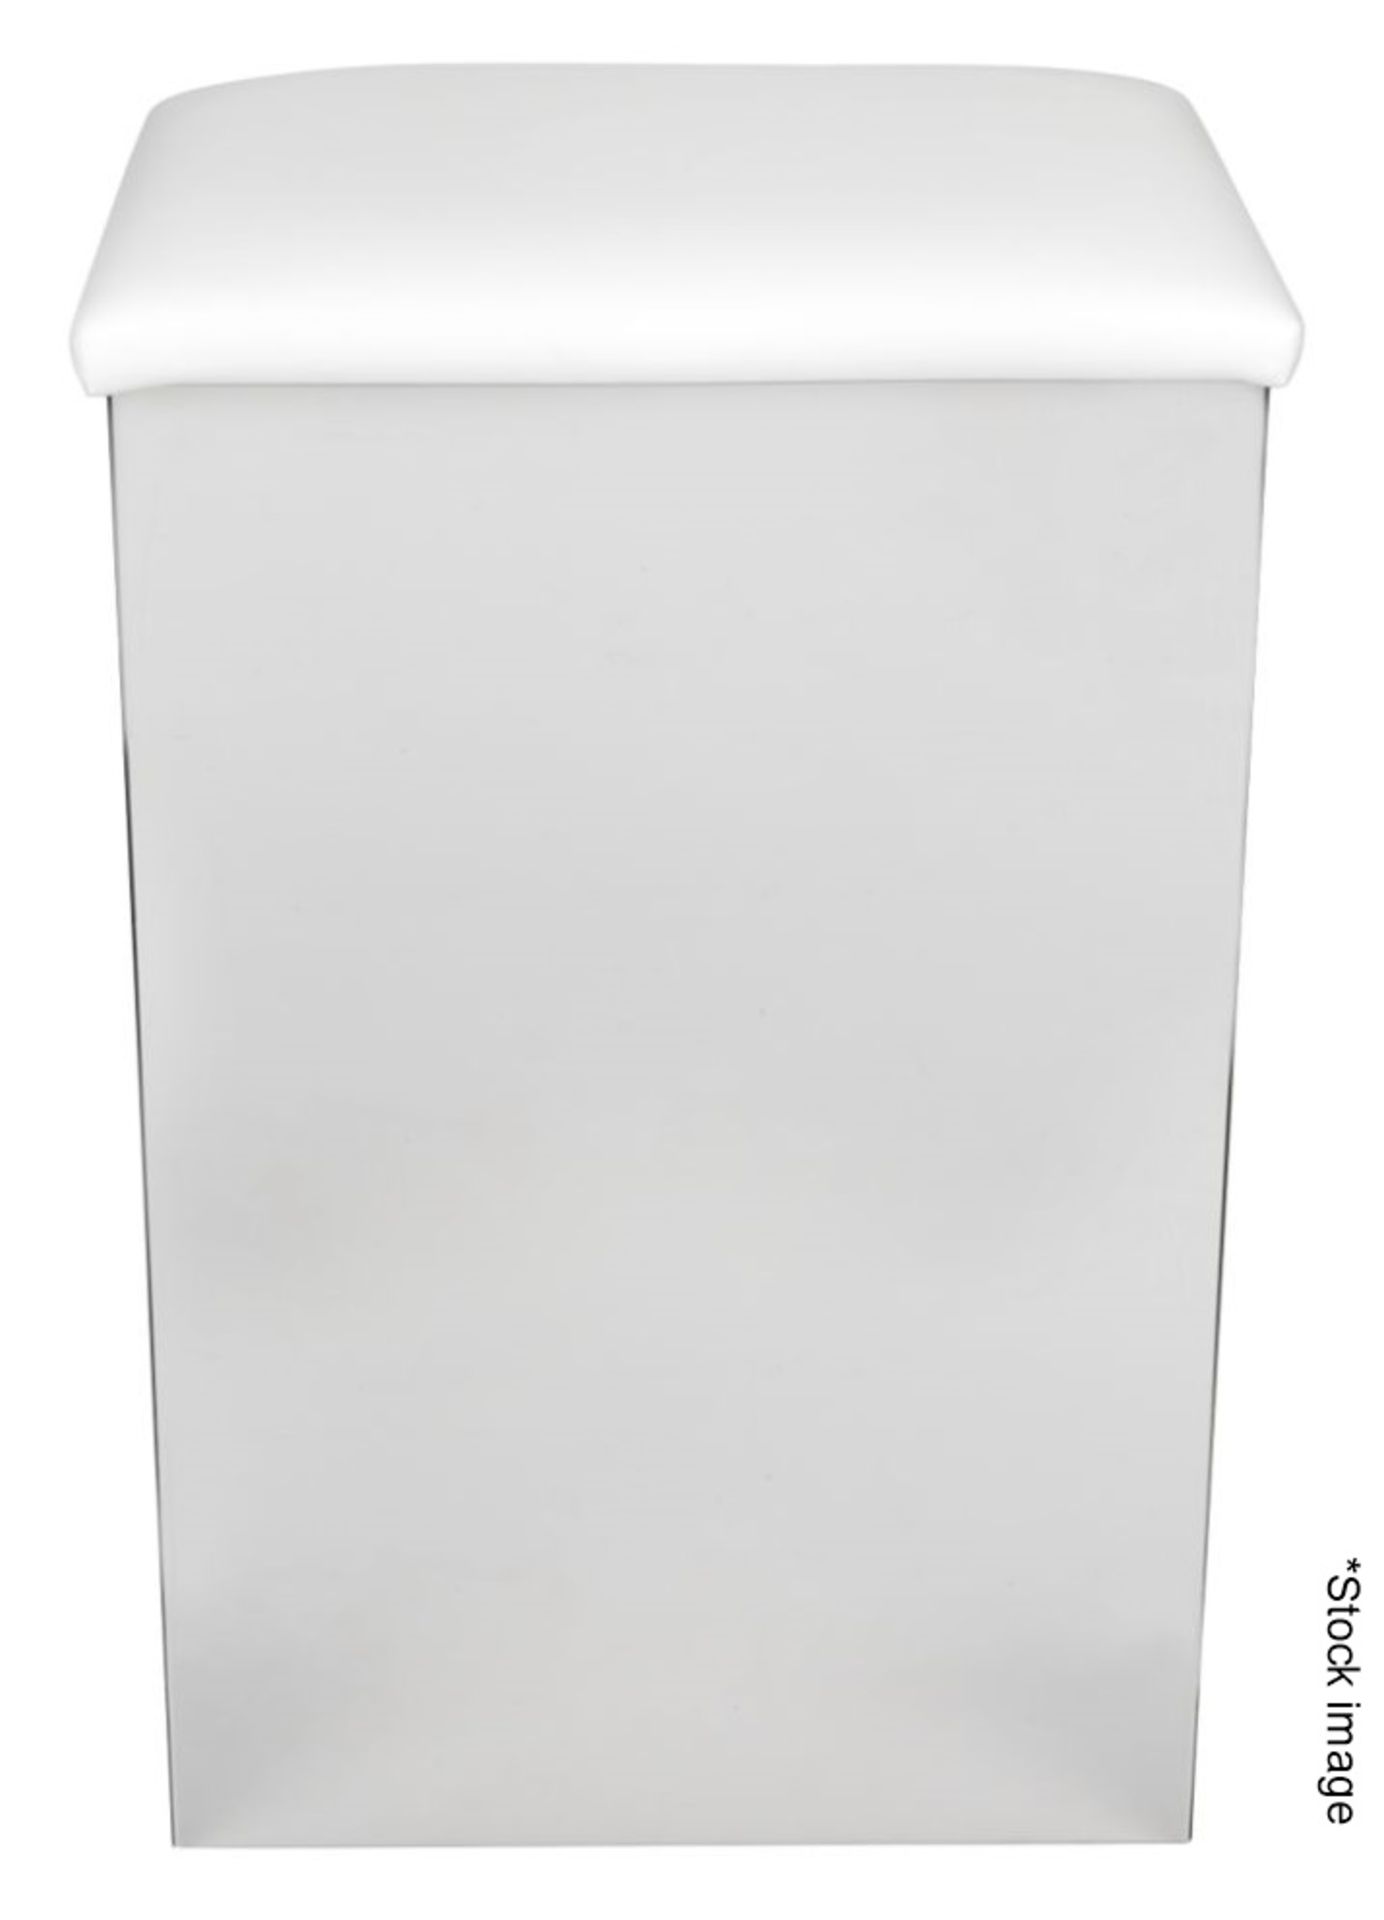 1 x ZODIAC Luxury Laundry Basket With An Uphostered Top - Original Price £1,280 - Image 6 of 12